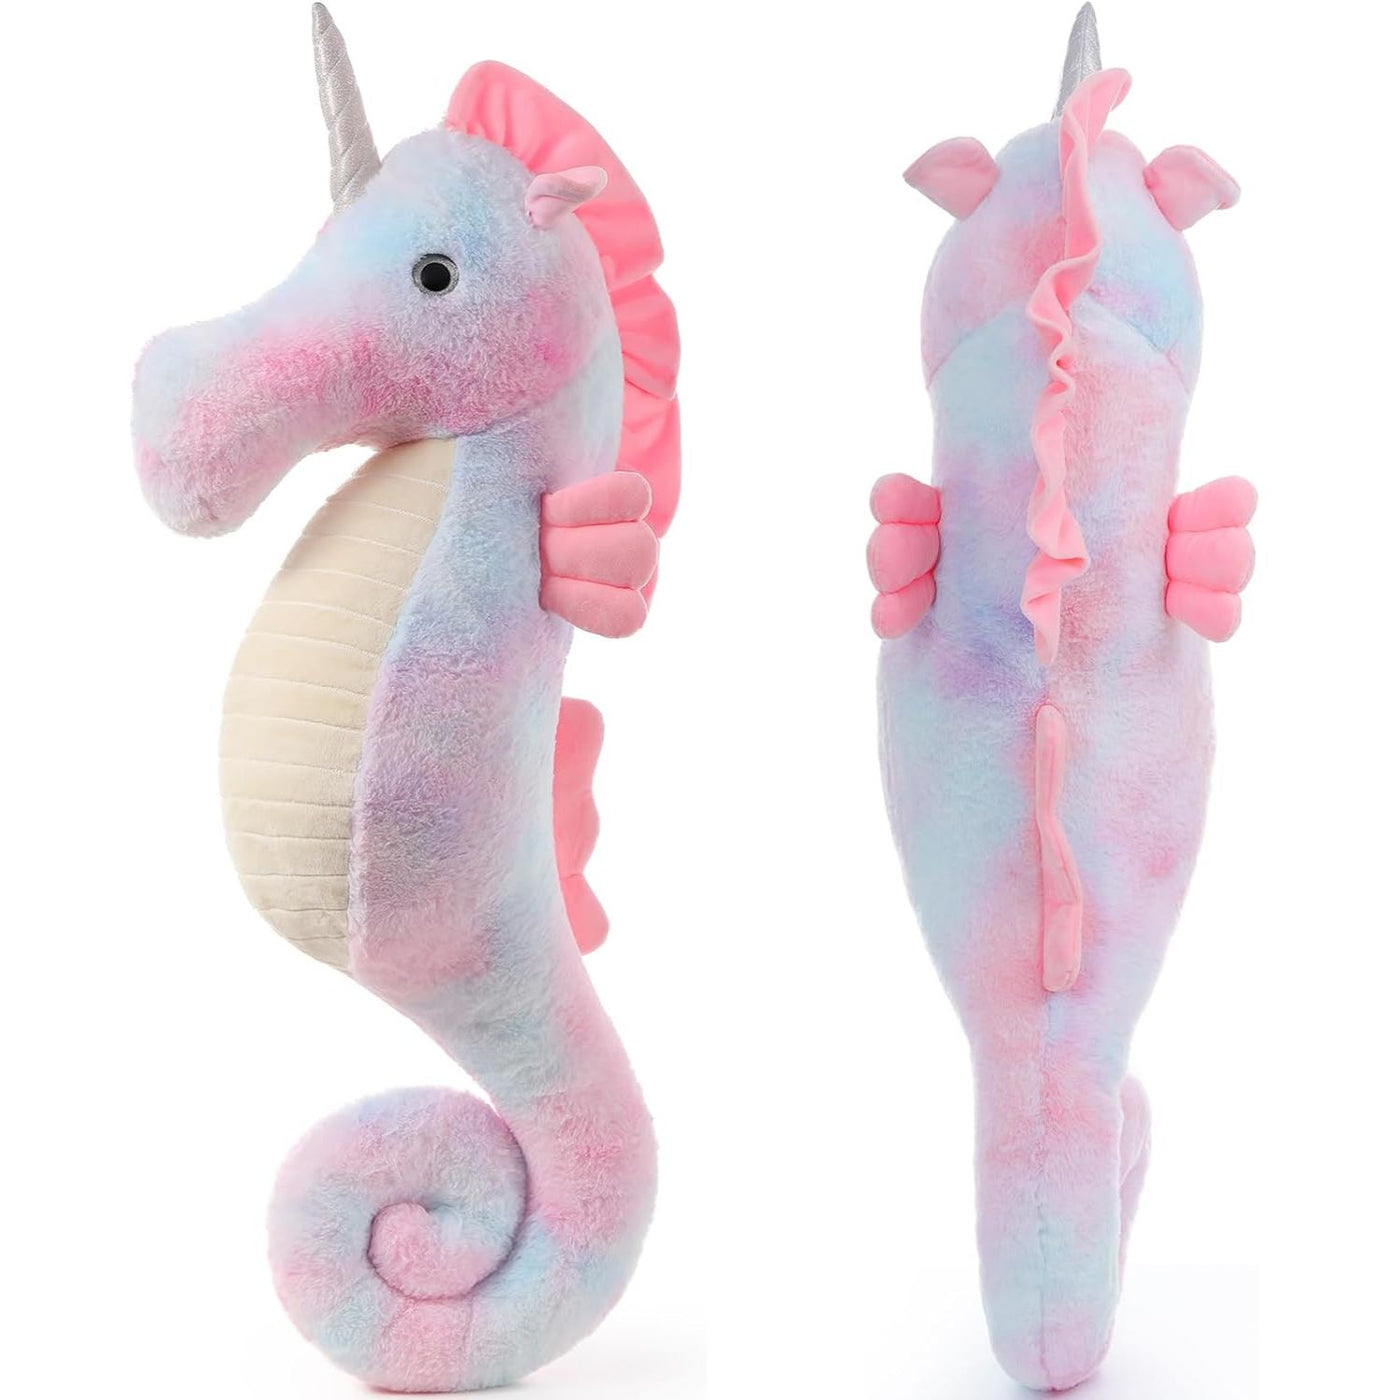 Seahorse Tie-Dye Stuffed Toy, 43.3 Inches